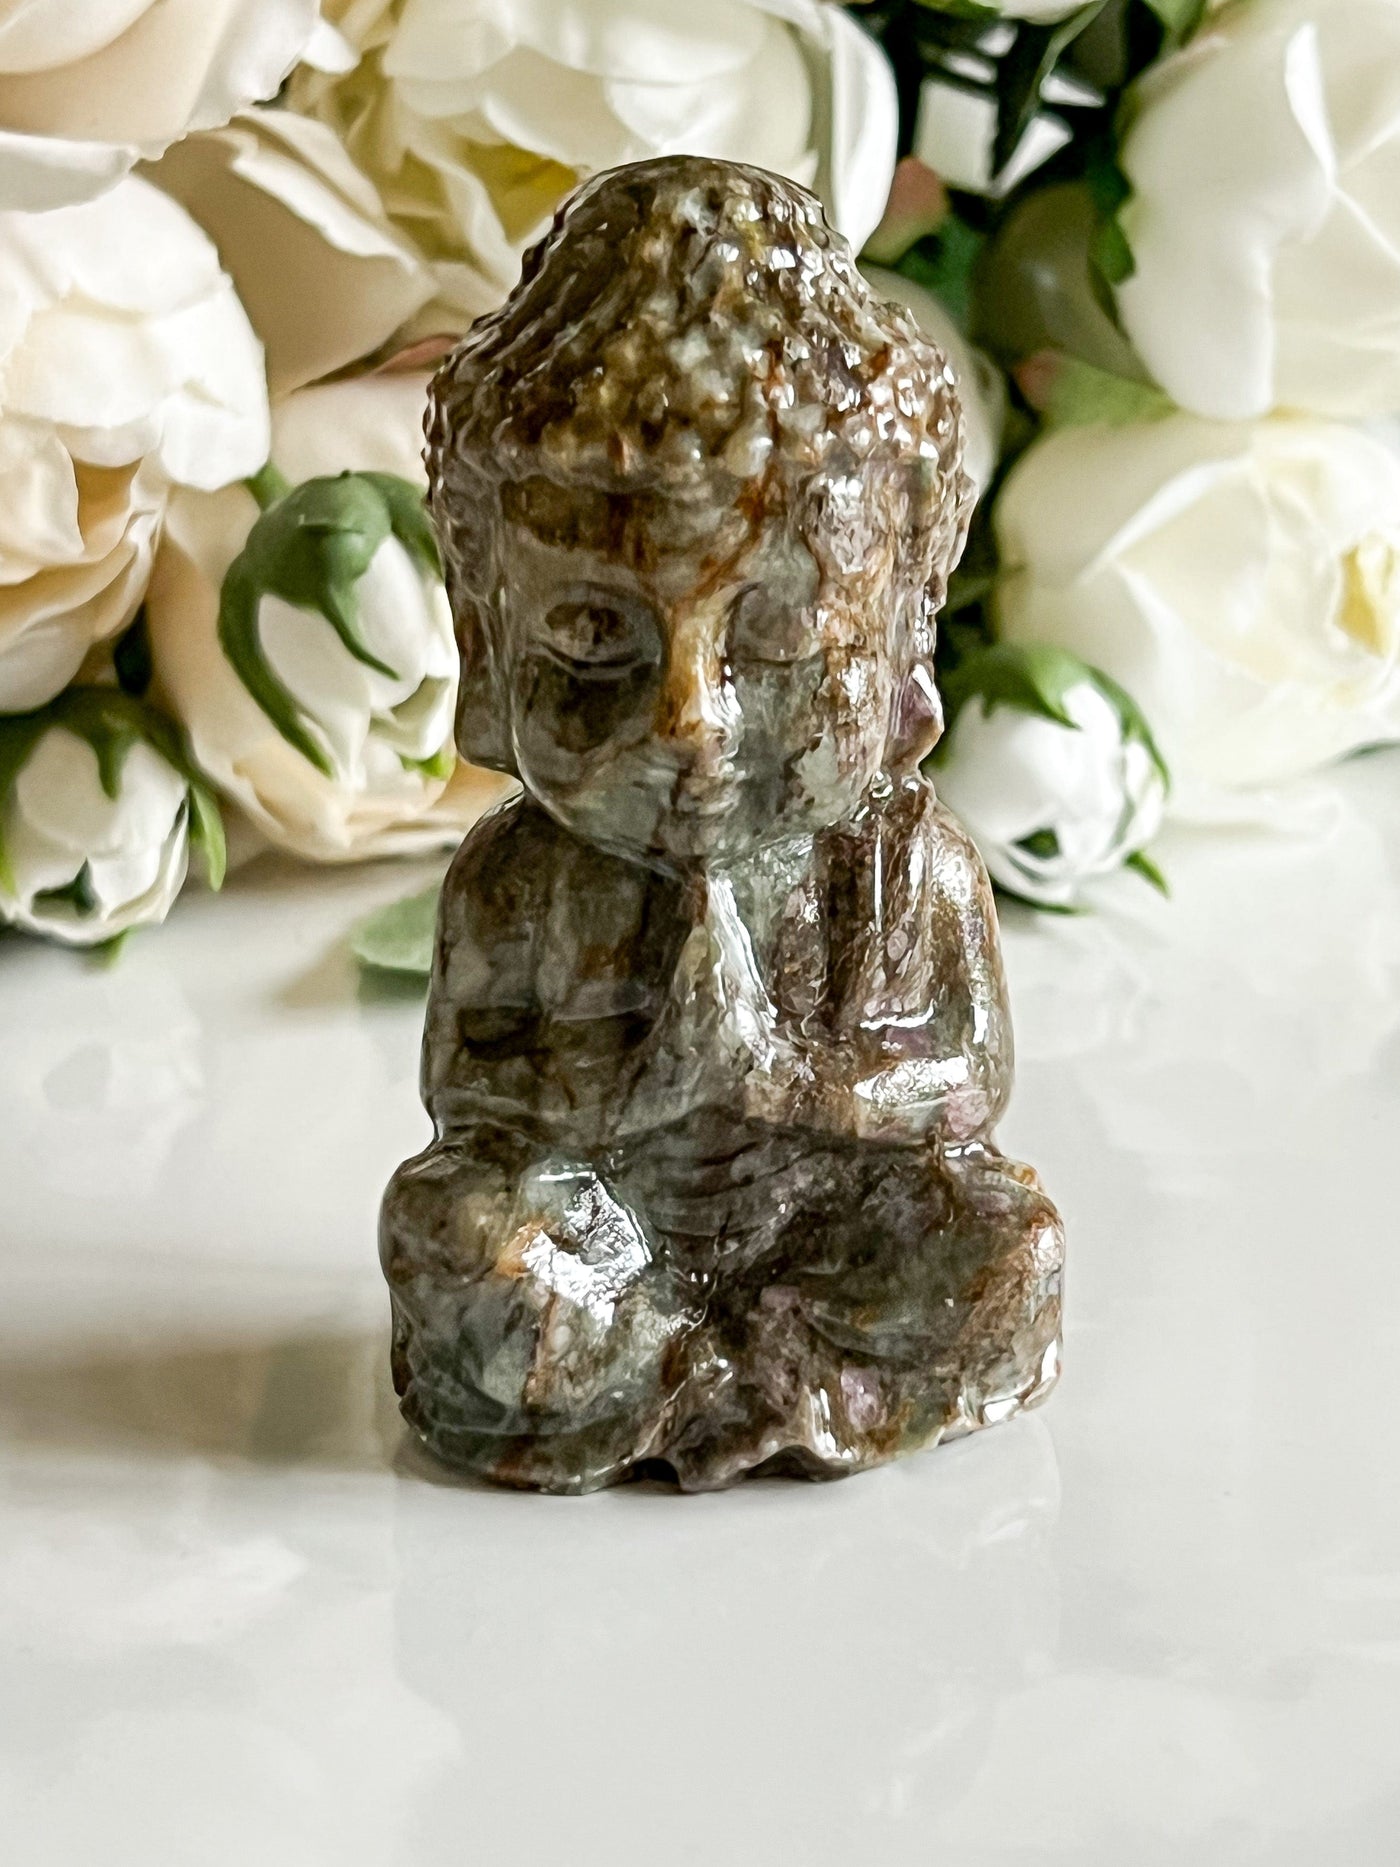 BABY BUDDAH OF RUBY KYANITE Revive In Style Vintage Furniture Painted Refinished Redesign Beautiful One of a Kind Artistic Antique Unique Home Decor Interior Design French Country Shabby Chic Cottage Farmhouse Grandmillenial Coastal Chalk Paint Metallic Glam Eclectic Quality Dovetailed Rustic Furniture Painter Pinterest Bedroom Living Room Entryway Kitchen Home Trends House Styles Decorating ideas